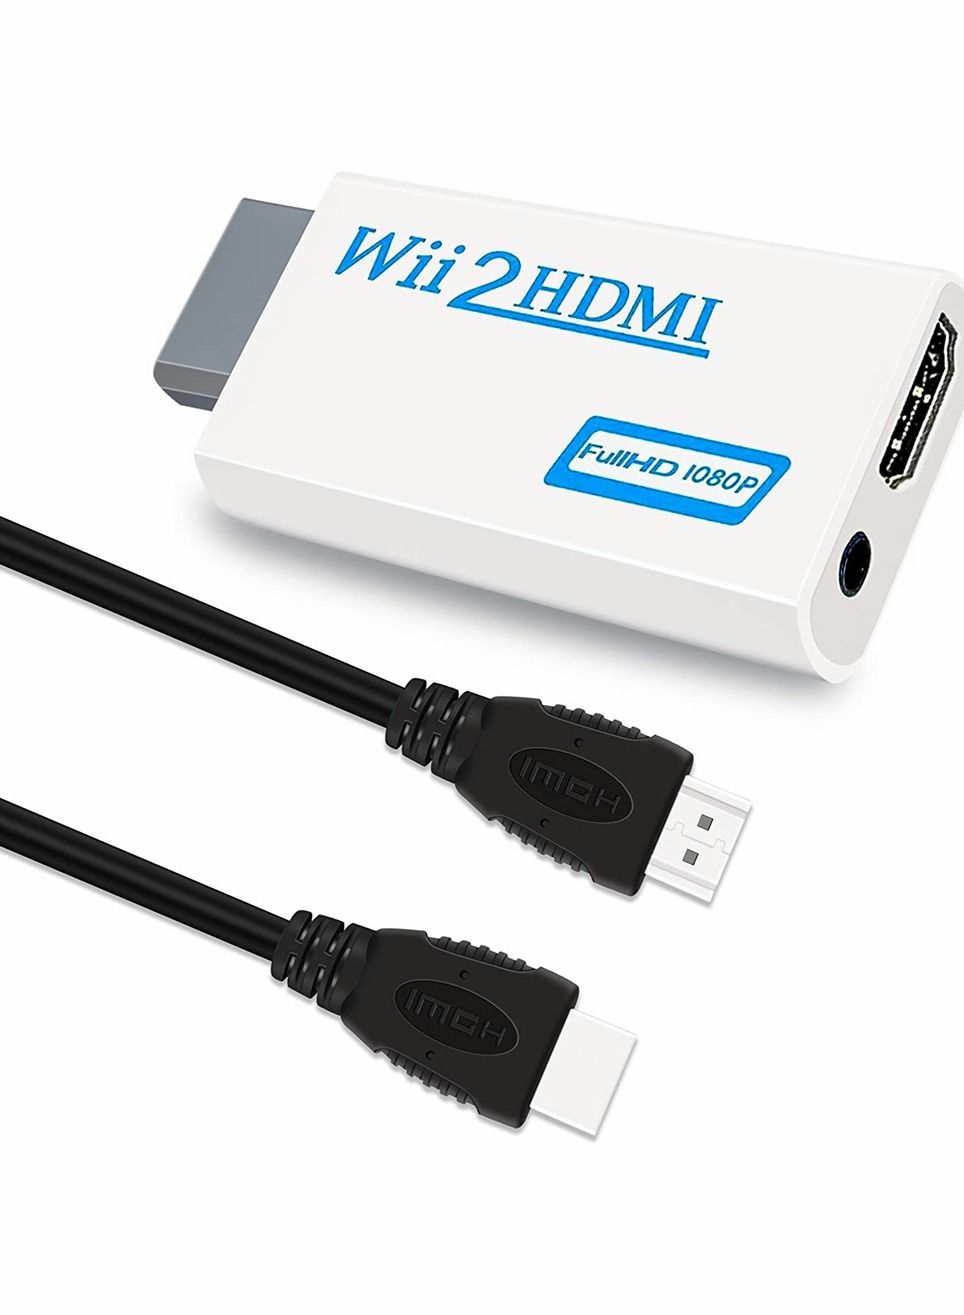 Wii to HDMI Converter, Wii to Hdmi Adapter 1080P with 5FT High Speed HDMI Cable Wii2 HDMI Adapter with 3.5mm Audio Jack And 1080p 720p HDMI Output Compatible with All Wii Display Modes (White) 